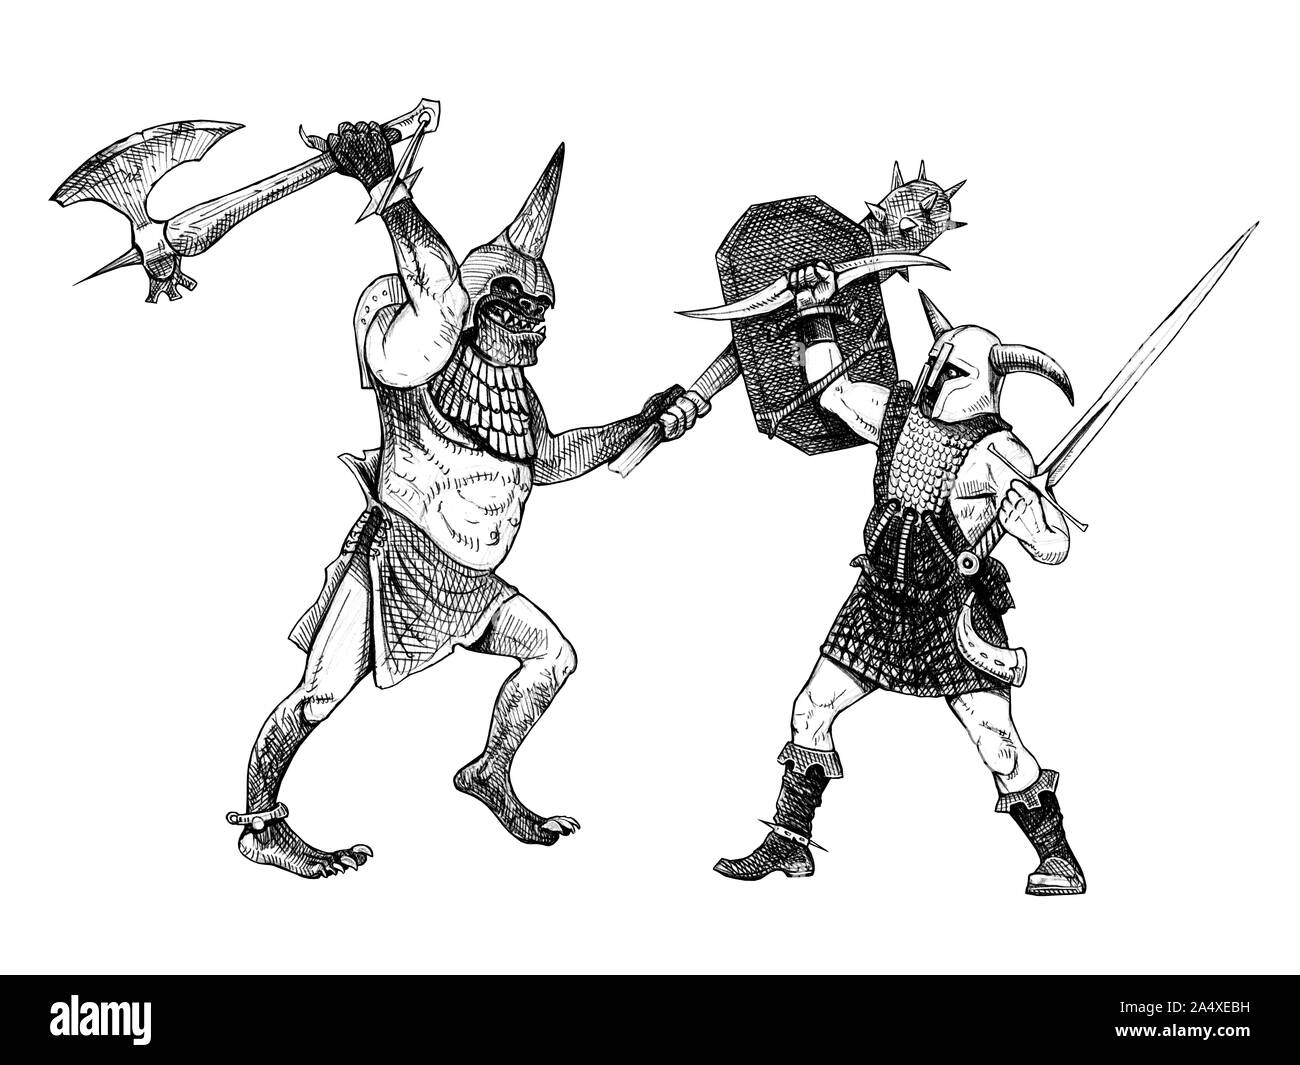 Fight between ork and human. Evil against good. Fantasy drawing. Stock Photo